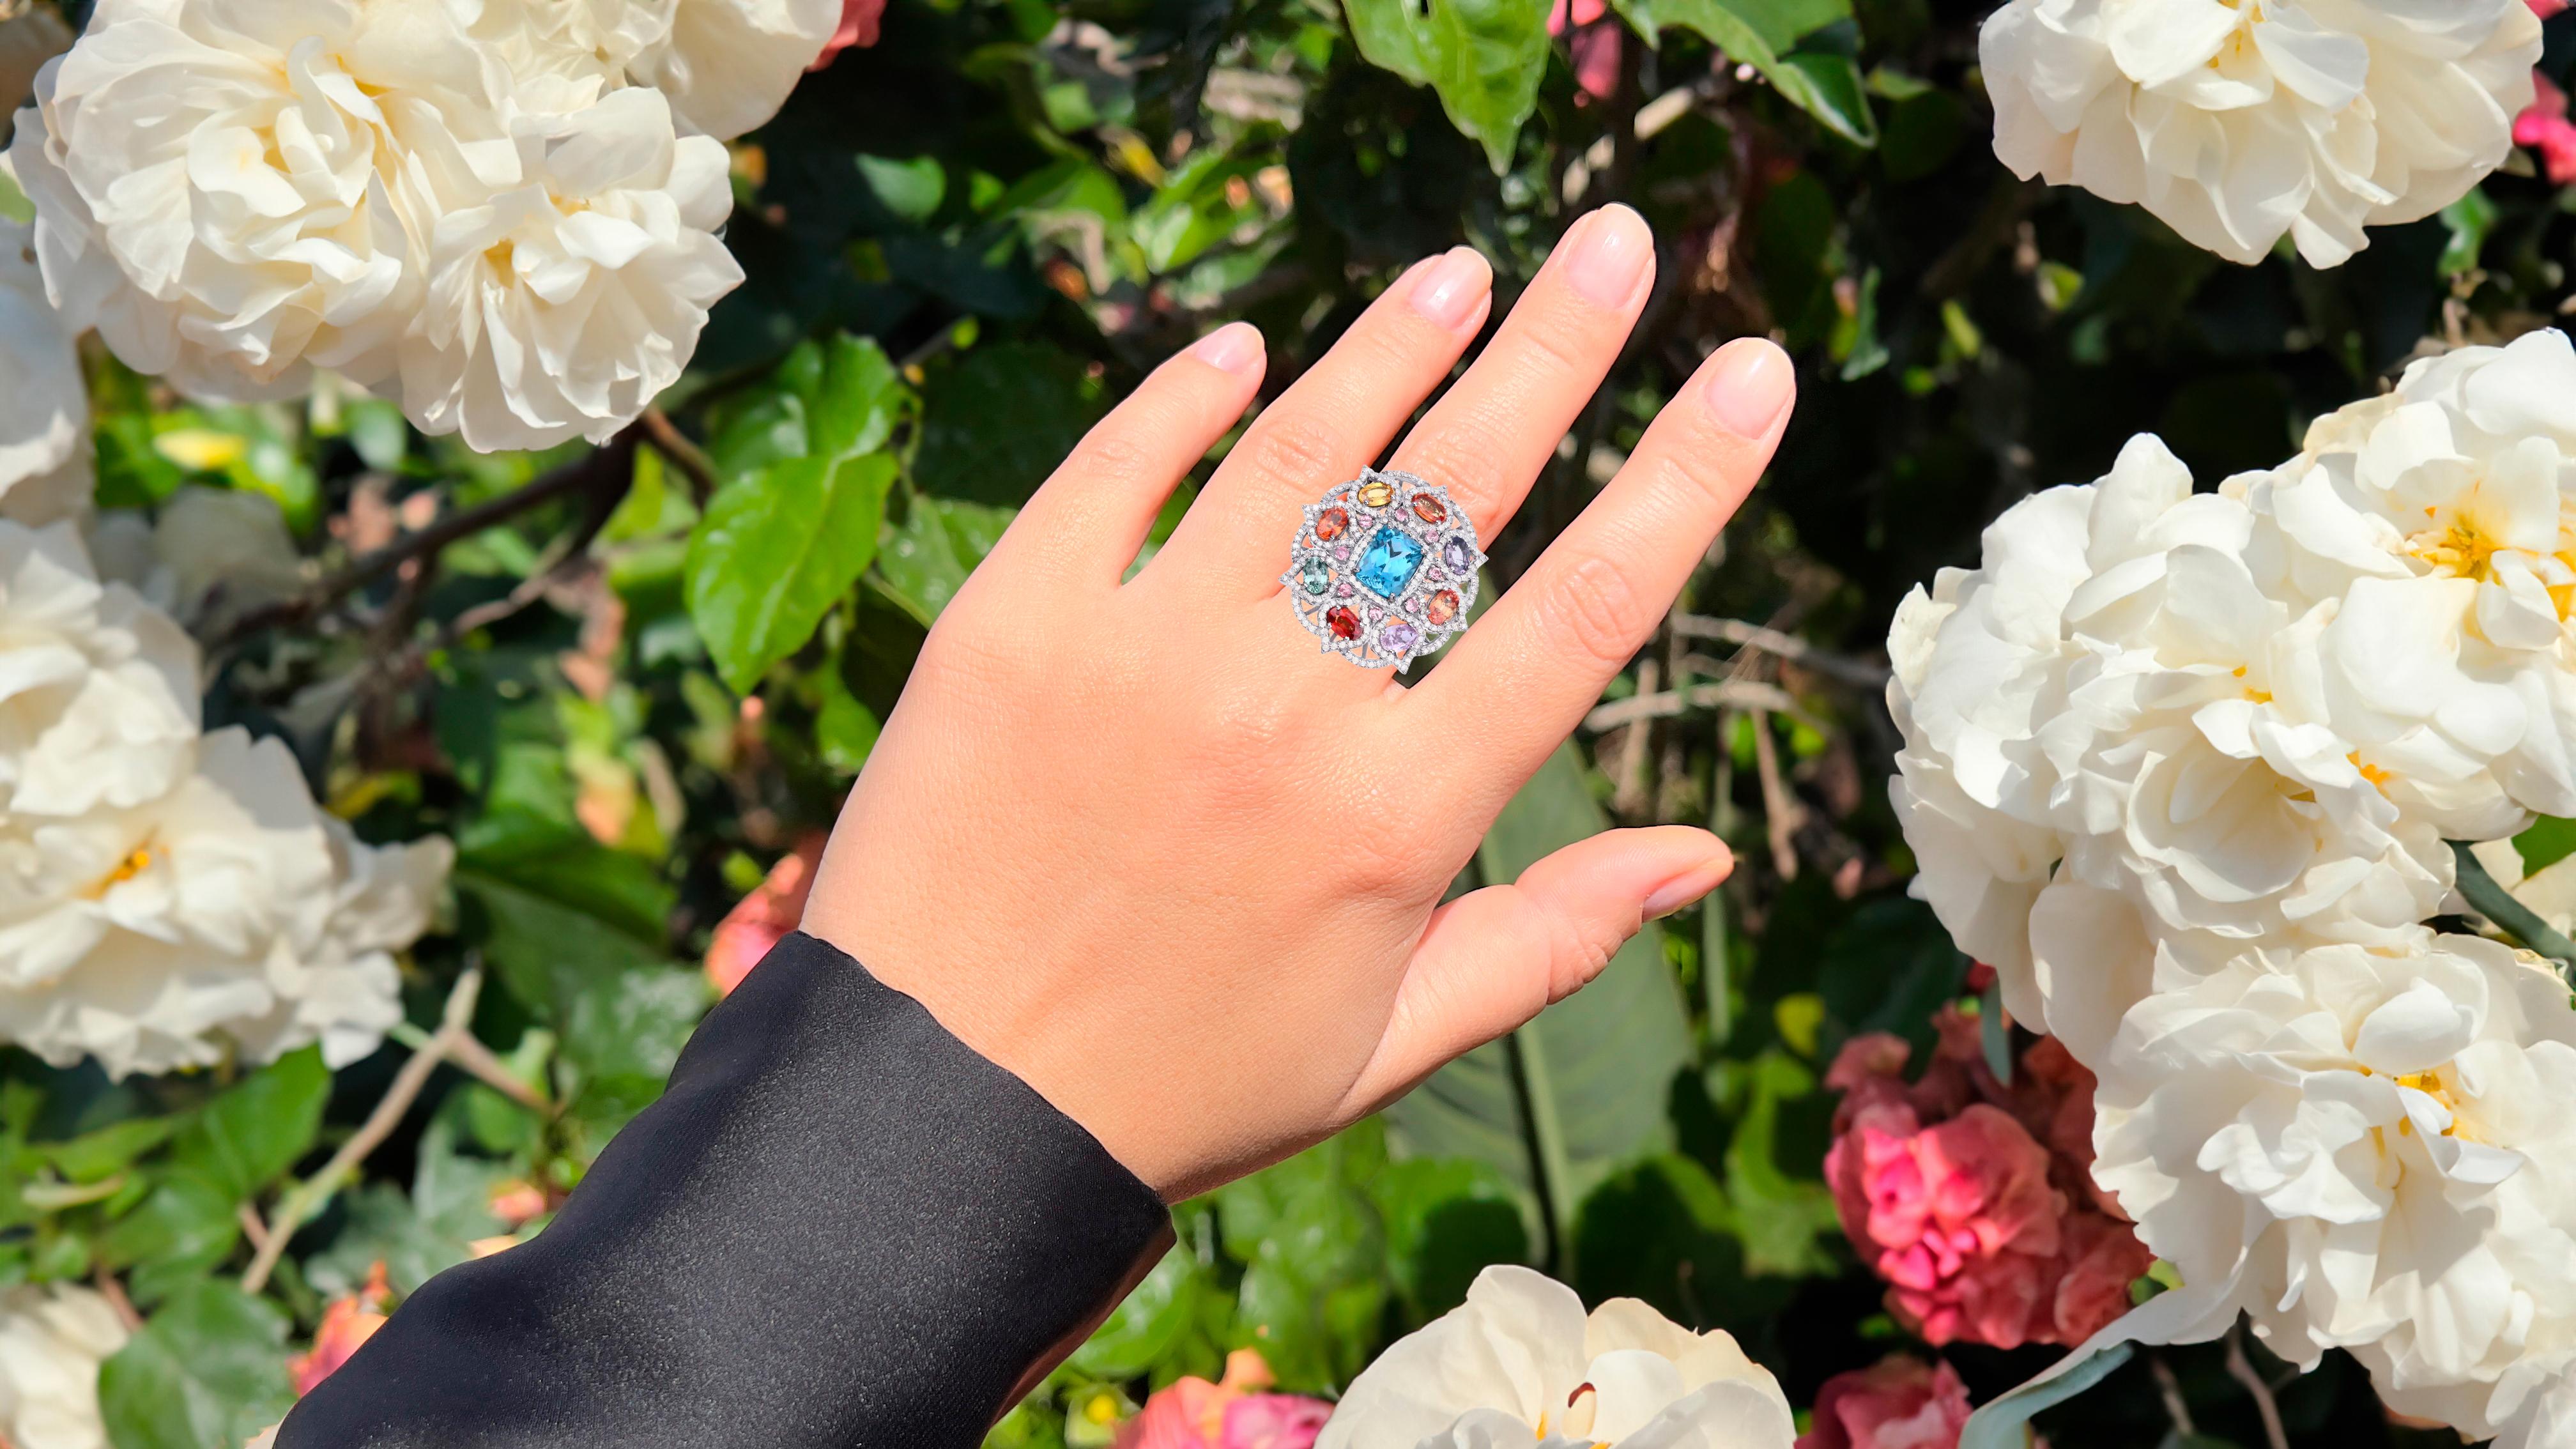 It comes with the Gemological Appraisal by GIA GG/AJP
All Gemstones are Natural
Blue Topaz = 4.45 Carat
8 Pink Tourmalines = 0.30 Carats
8 Multicolored Sapphires = 4.90 Carats
210 Diamonds = 1.53 Carats
Metal: Black Rhodium Plated Sterling